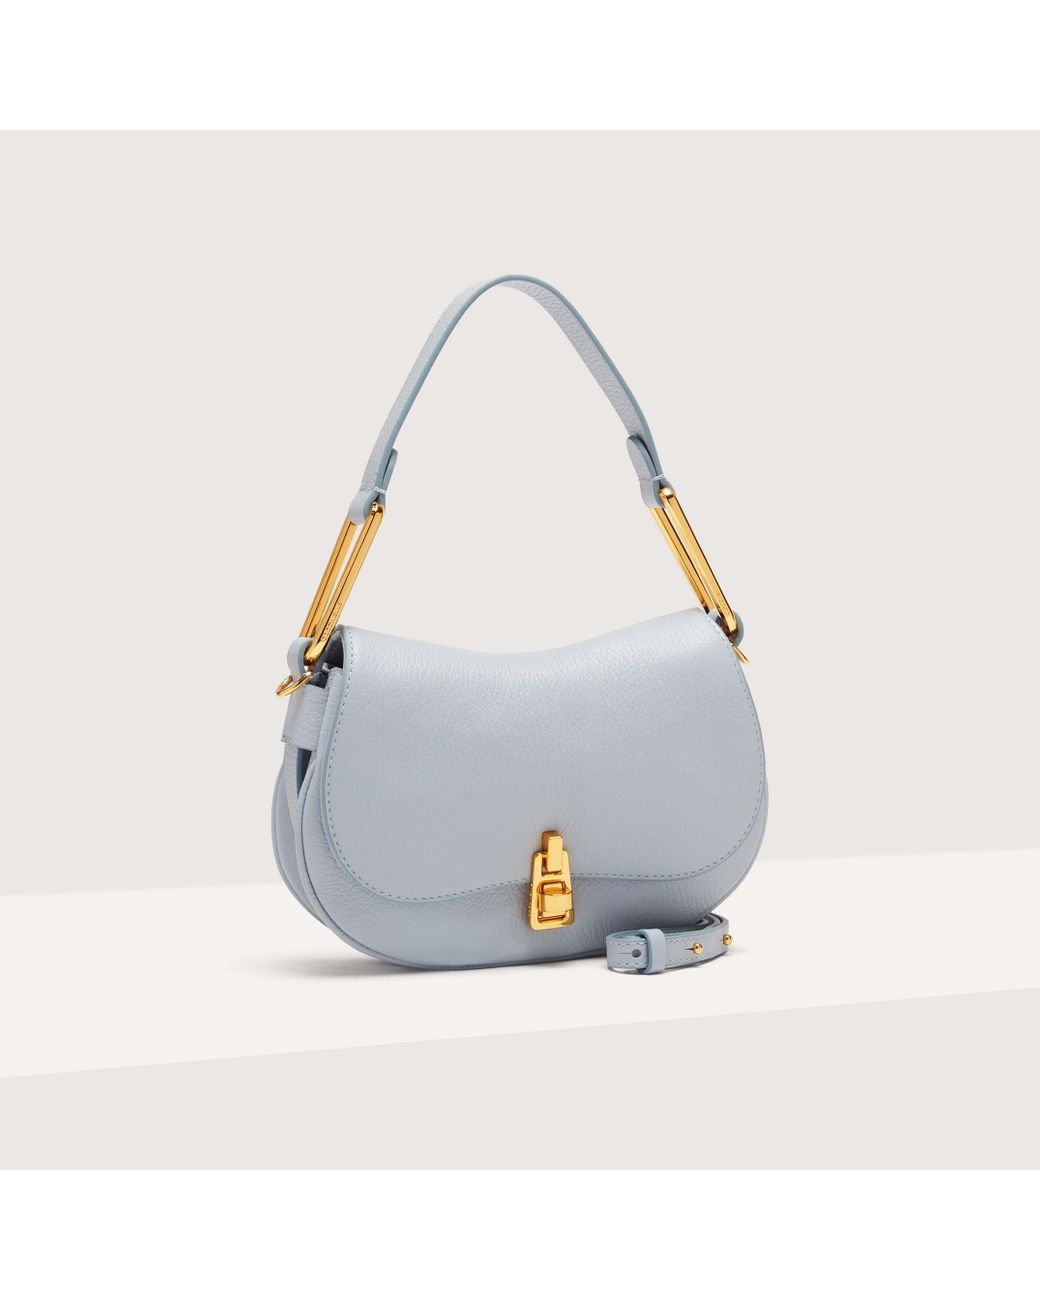 Coccinelle Grained Leather Handbag Magie Soft Mini in Blue | Lyst UK